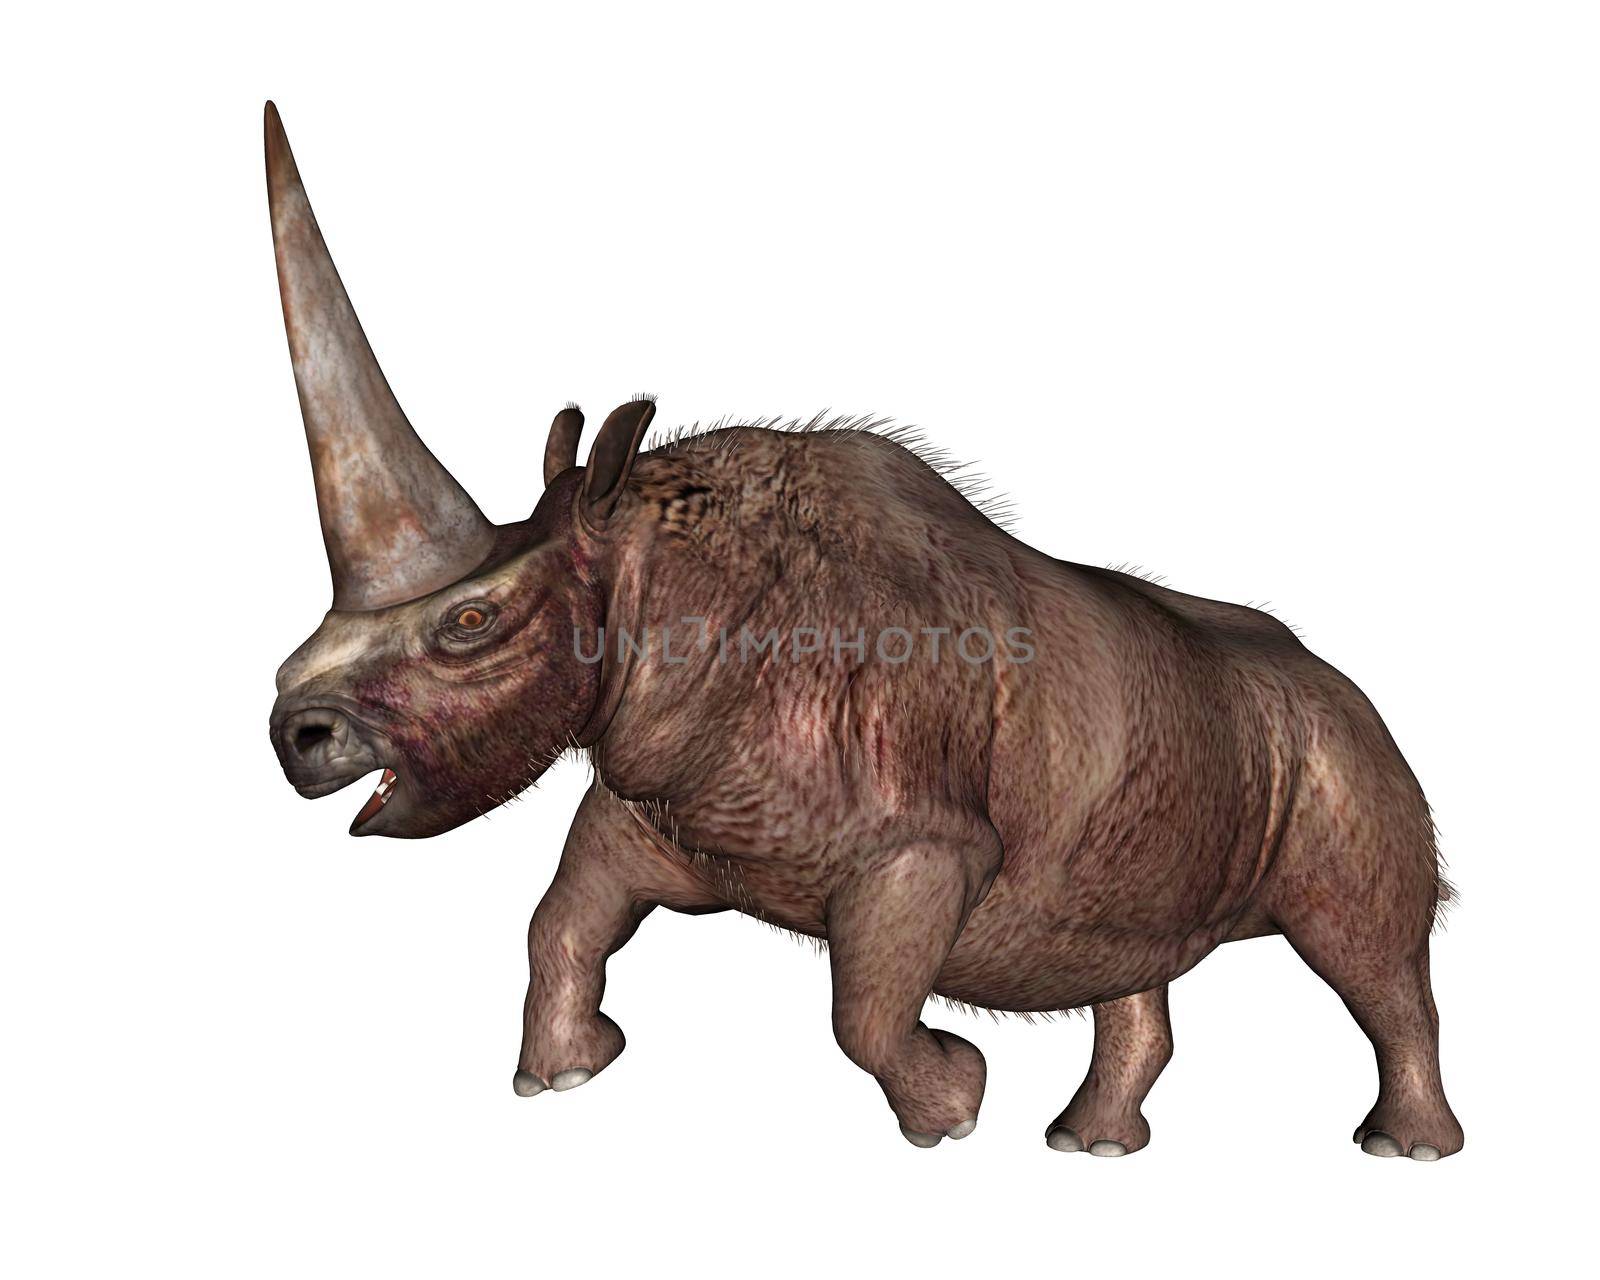 Elasmotherium rhinoceros with big horn roaring up isolated in white background- 3D render